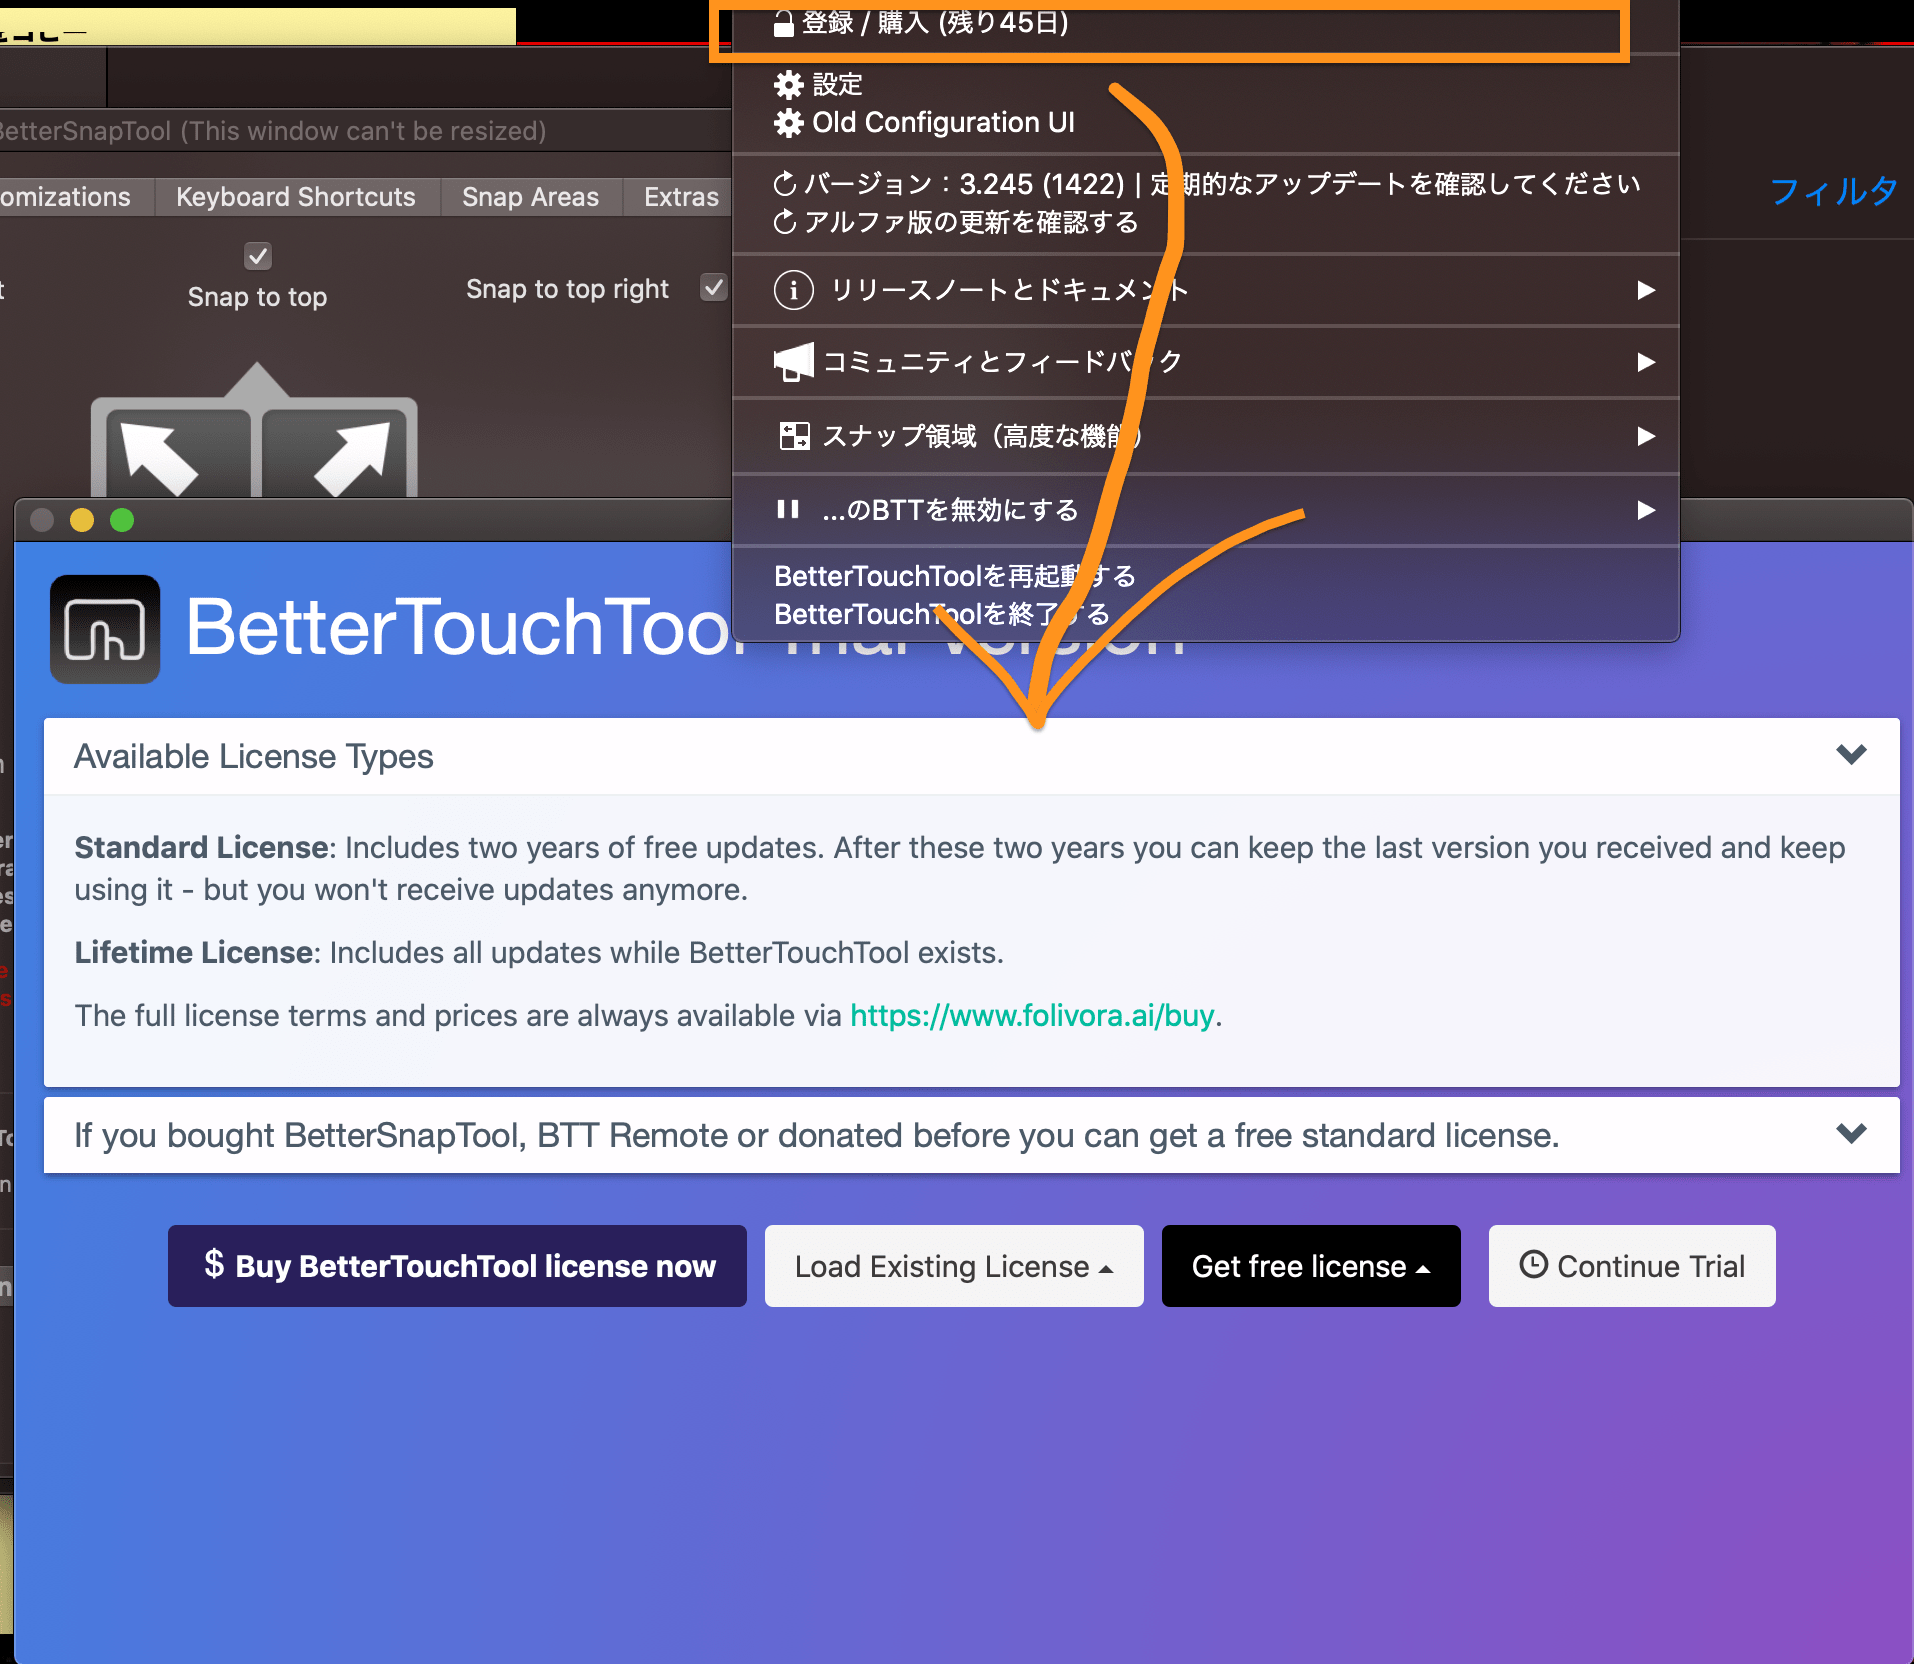 better touch tool mac download